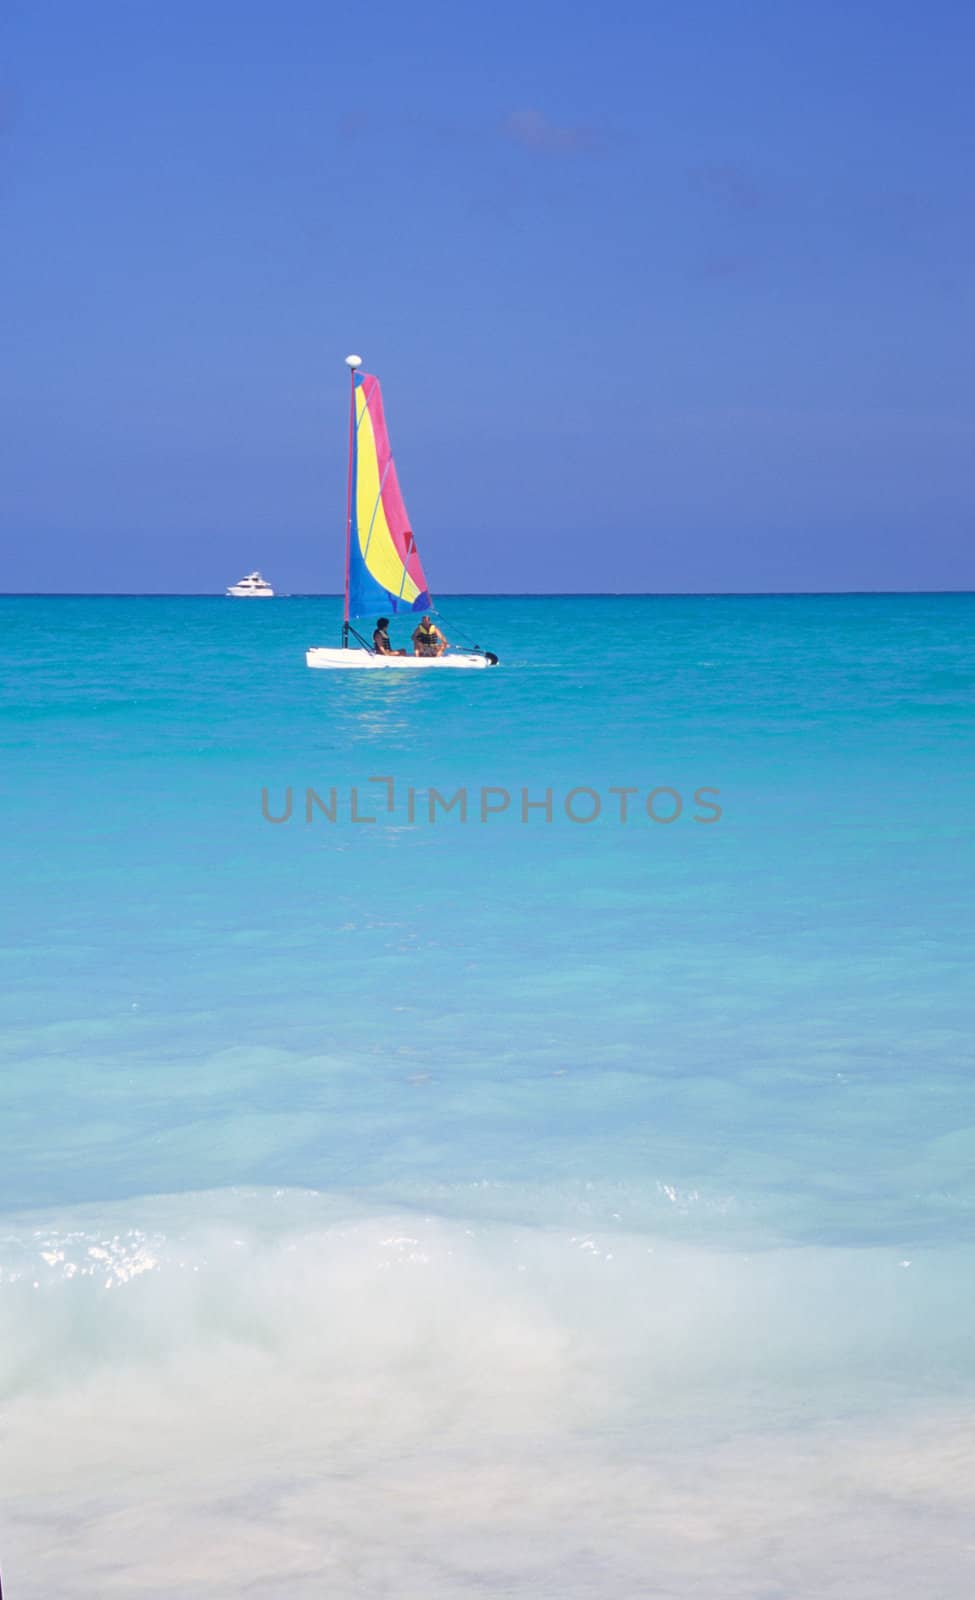 A happy couple sails the turquoise waters of the Bahamas.